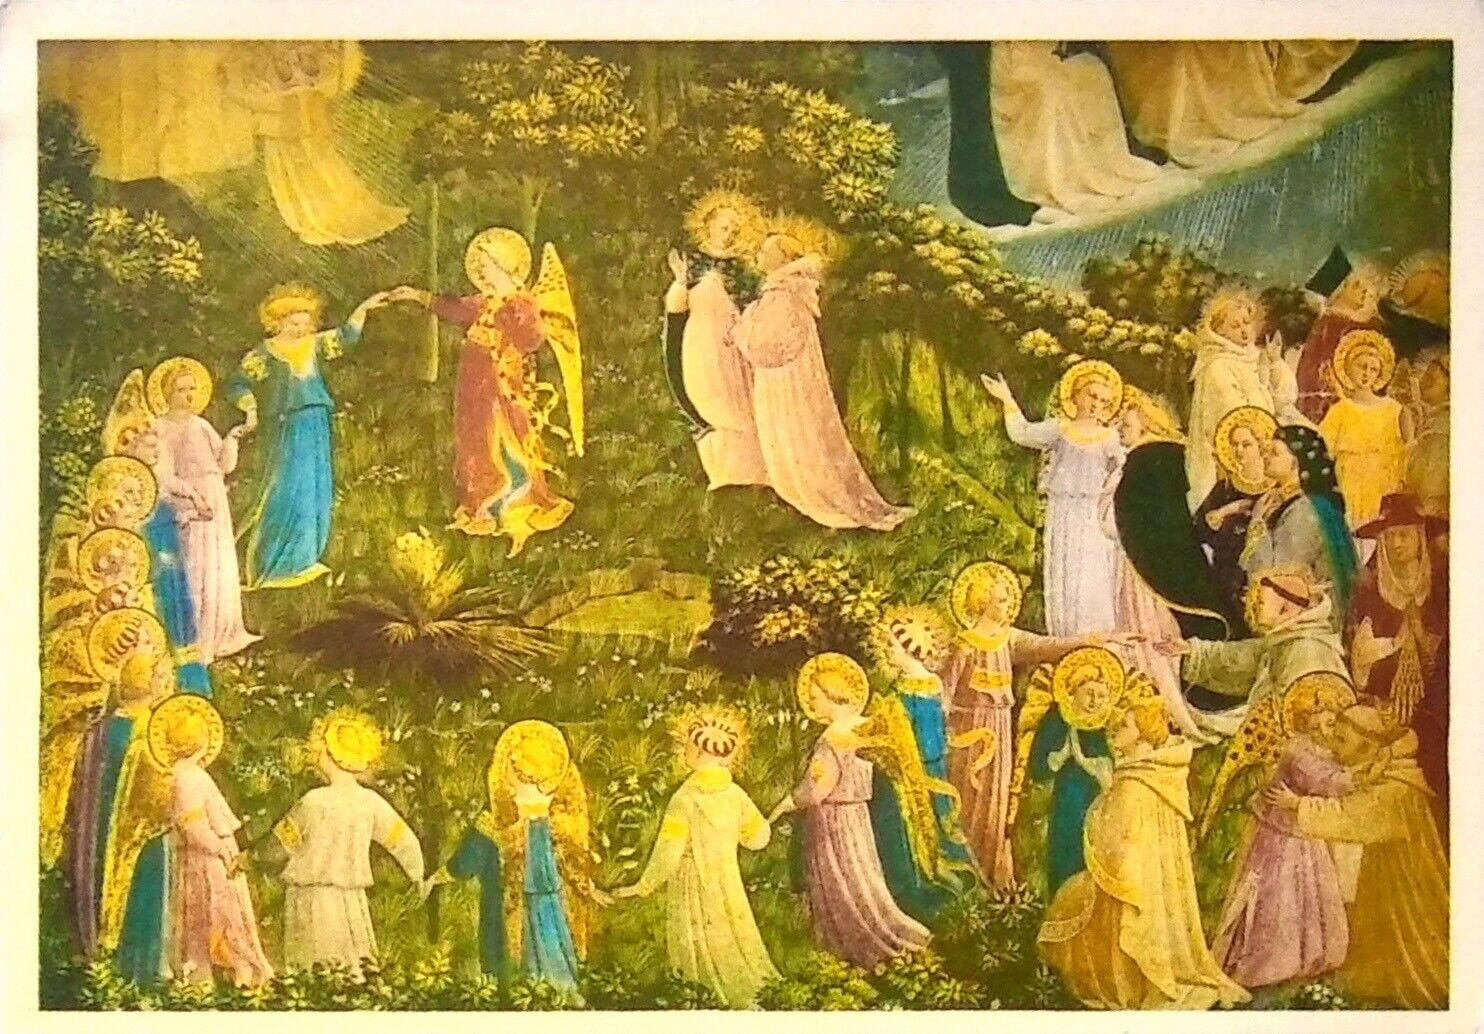 THE LAST JUDGEMENT WALL FRA ANGELICO - POSTCARD